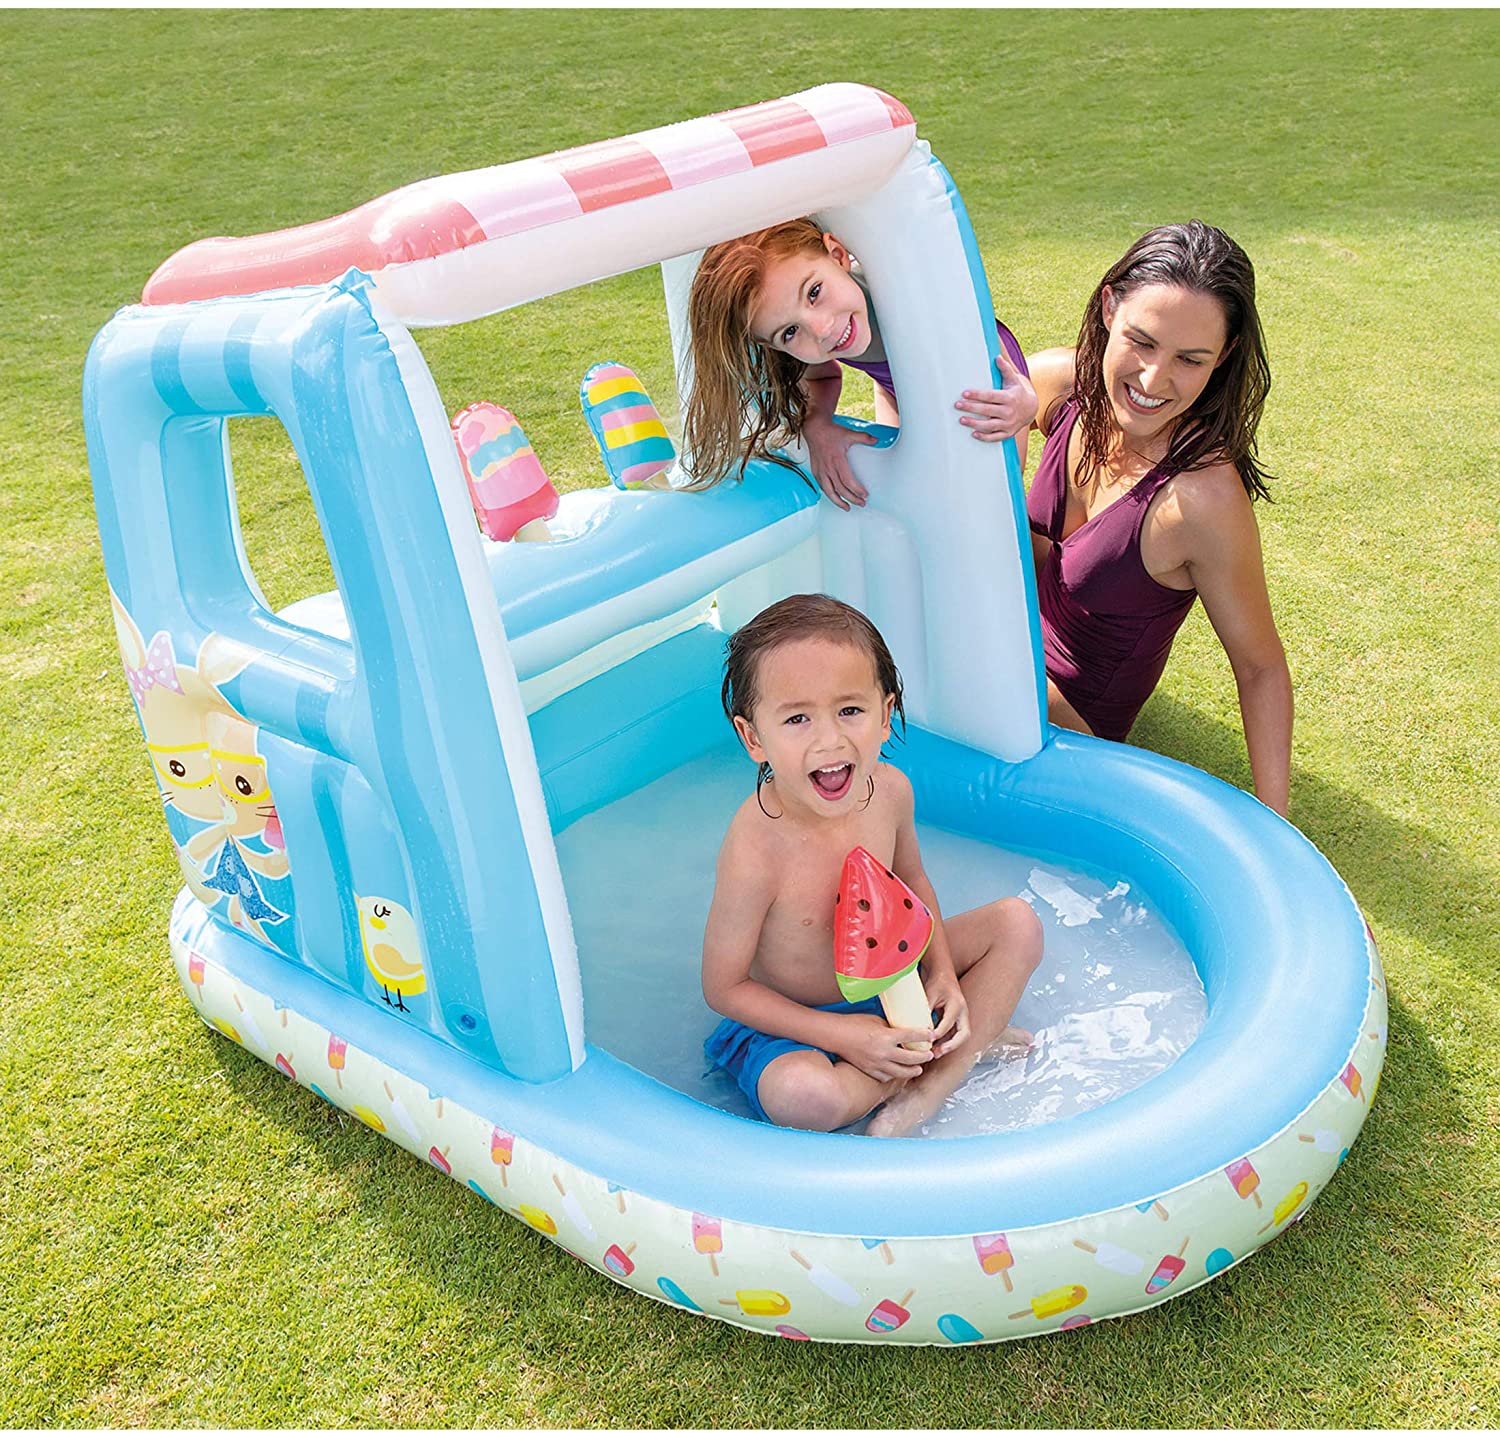 Intex Ice Cream Stand Inflatable Playhouse and Pool, for Ages 2-6, Multi, Model Number: 48672